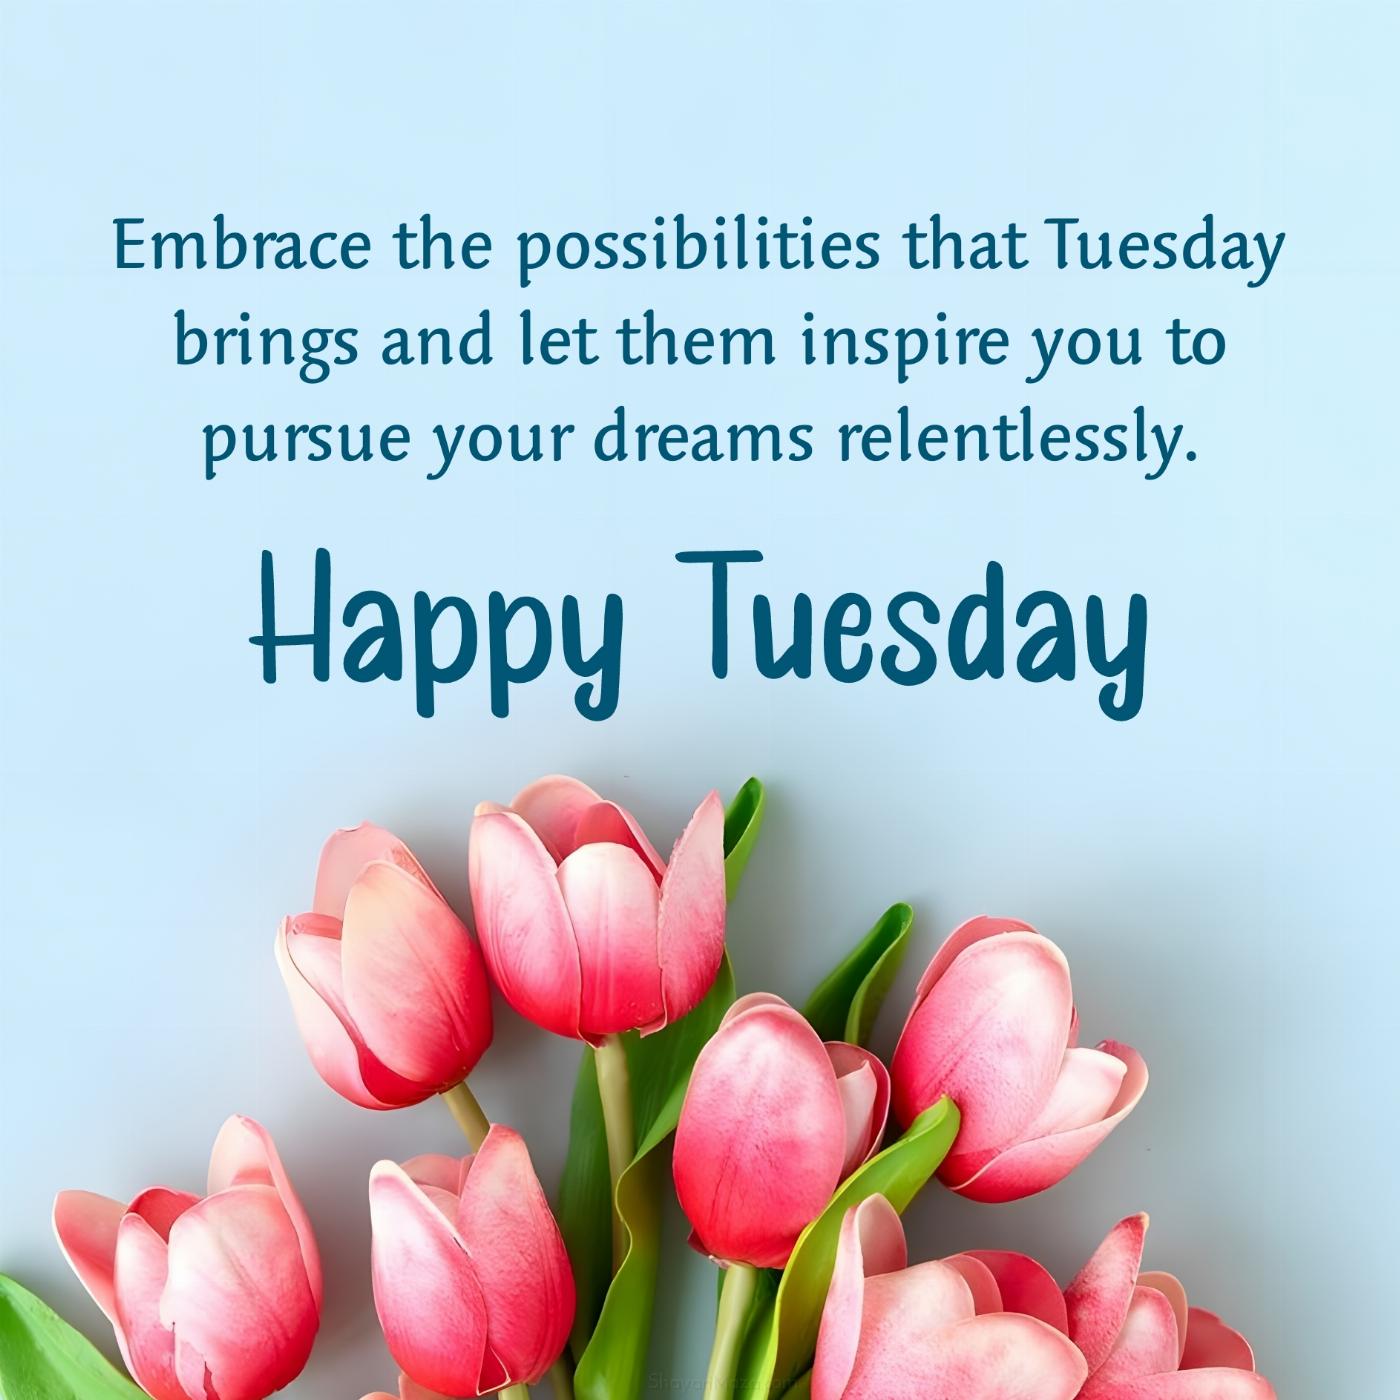 Embrace the possibilities that Tuesday brings and let them inspire you to